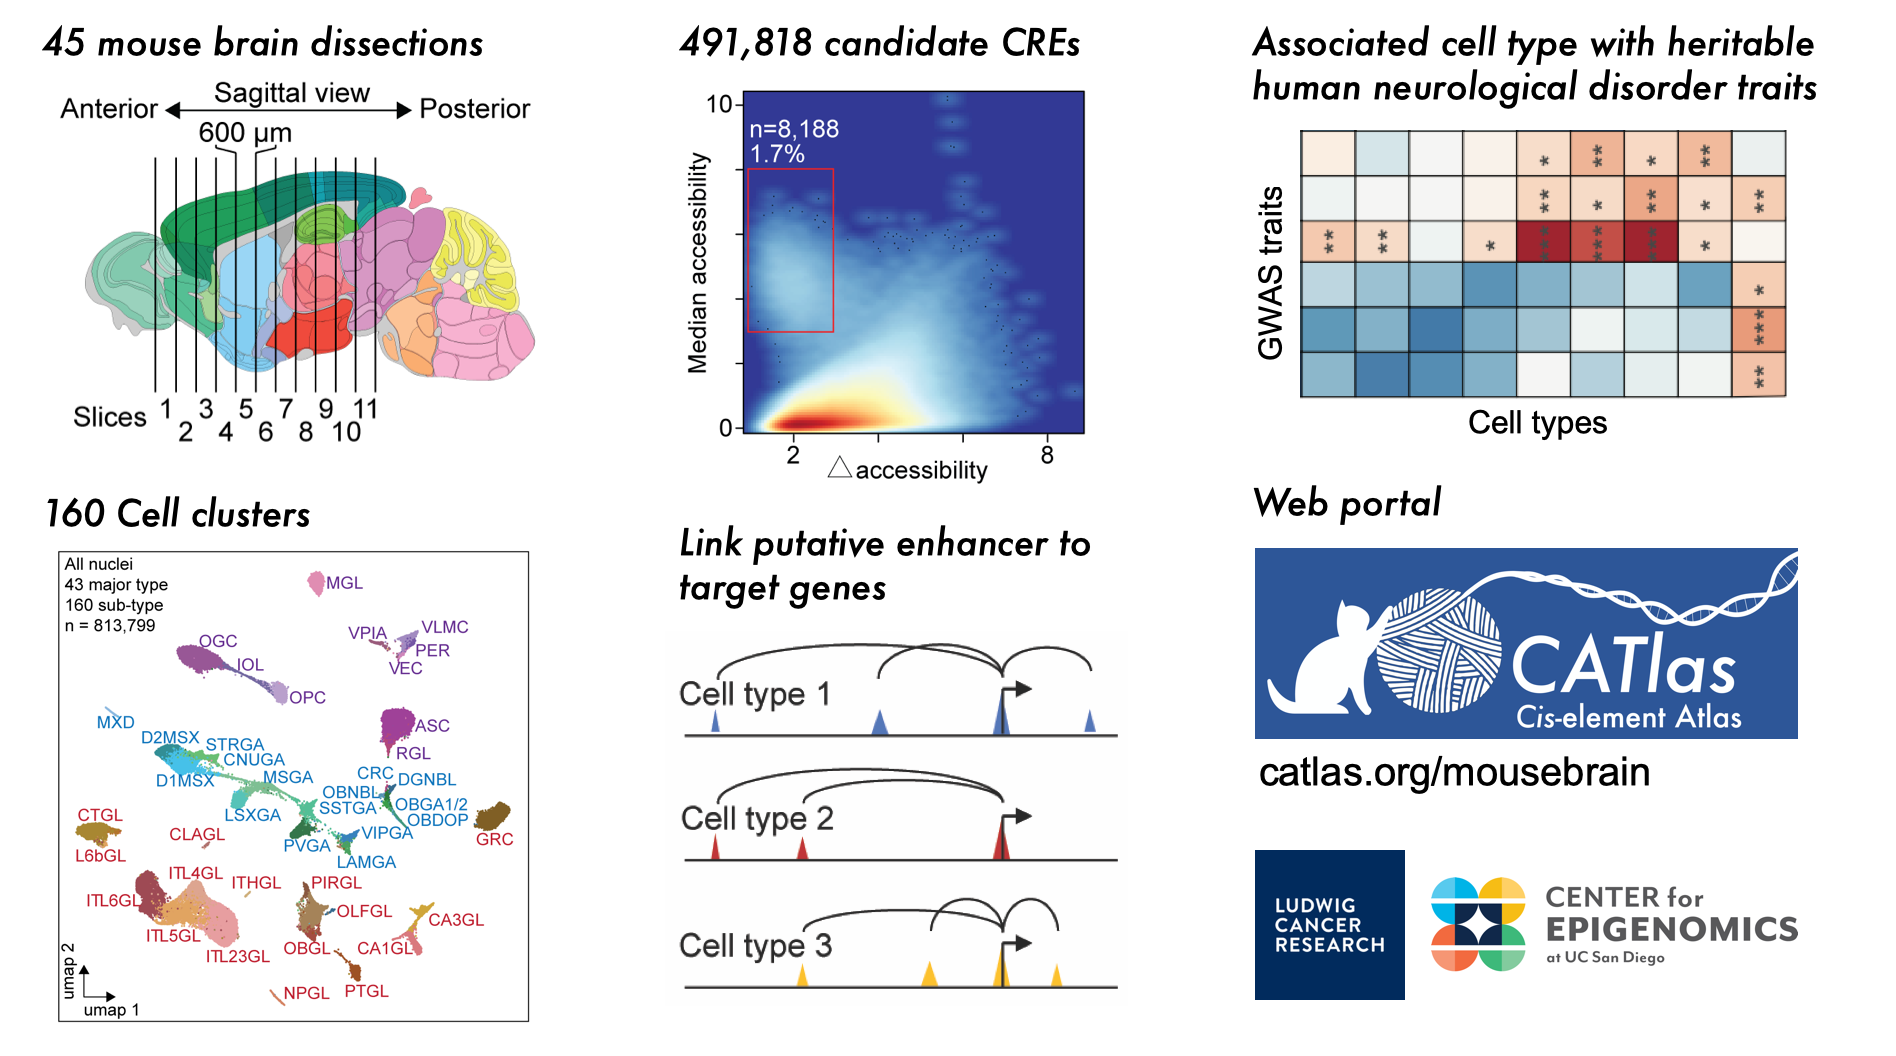 Yang & Sebastian's single cell mouse brain paper published on Nature today!